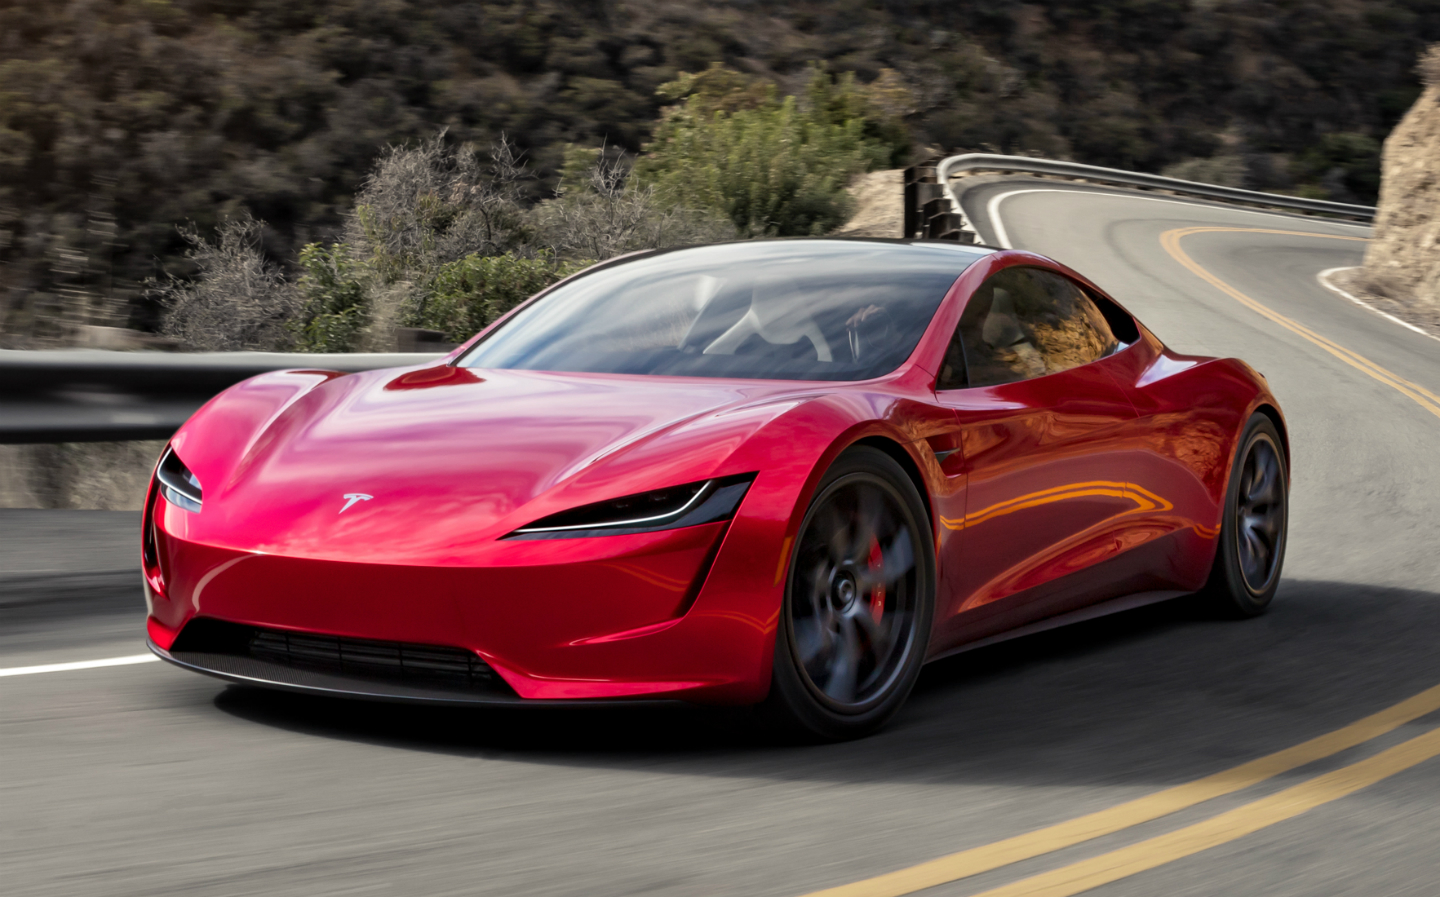 Elon Musk claims the Tesla Roadster will be able to fly